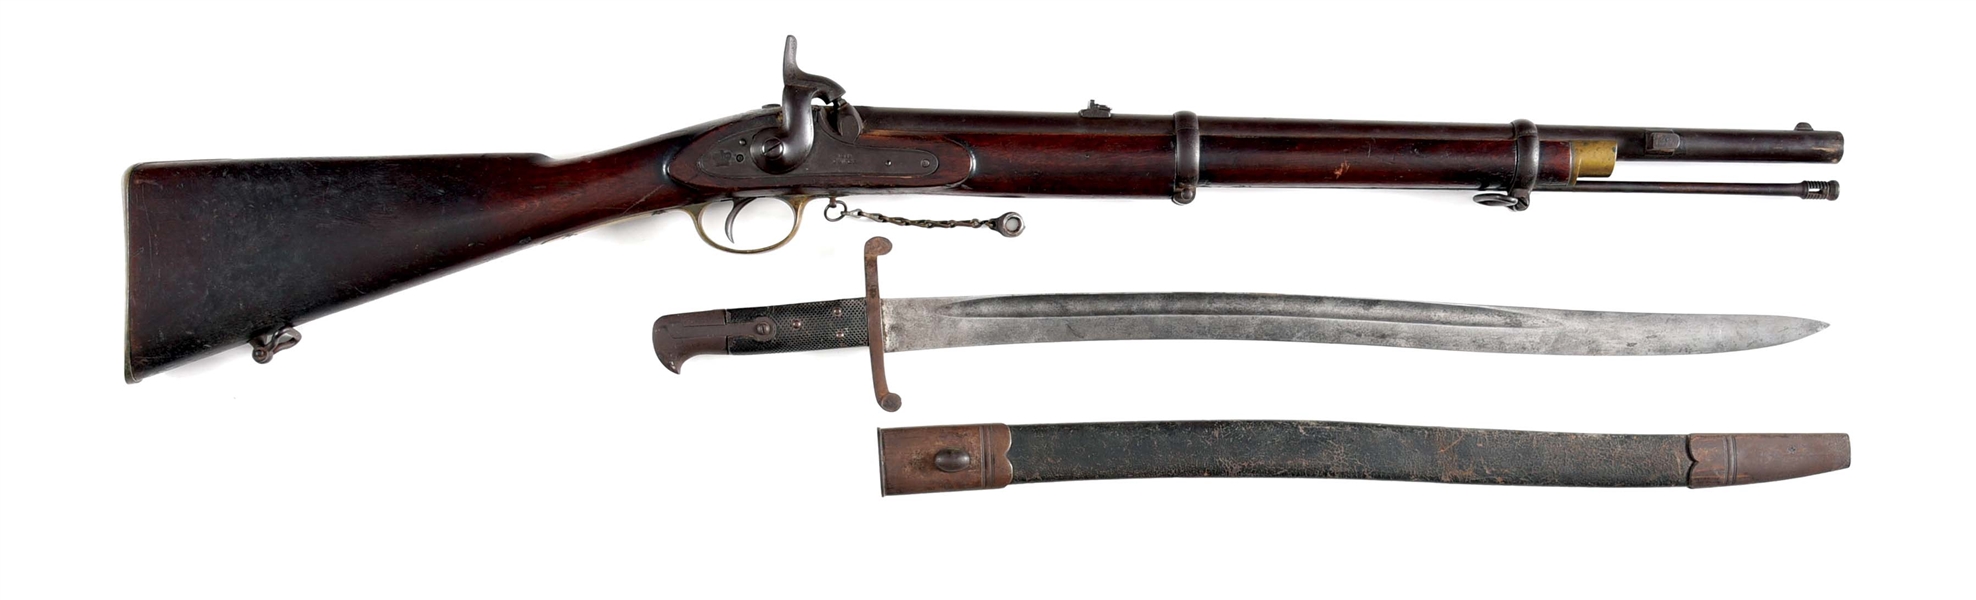 (A) BRITISH ENFIELD 1861 MUSKETOON DATED 1862 WITH YATAGHAN BAYONET.